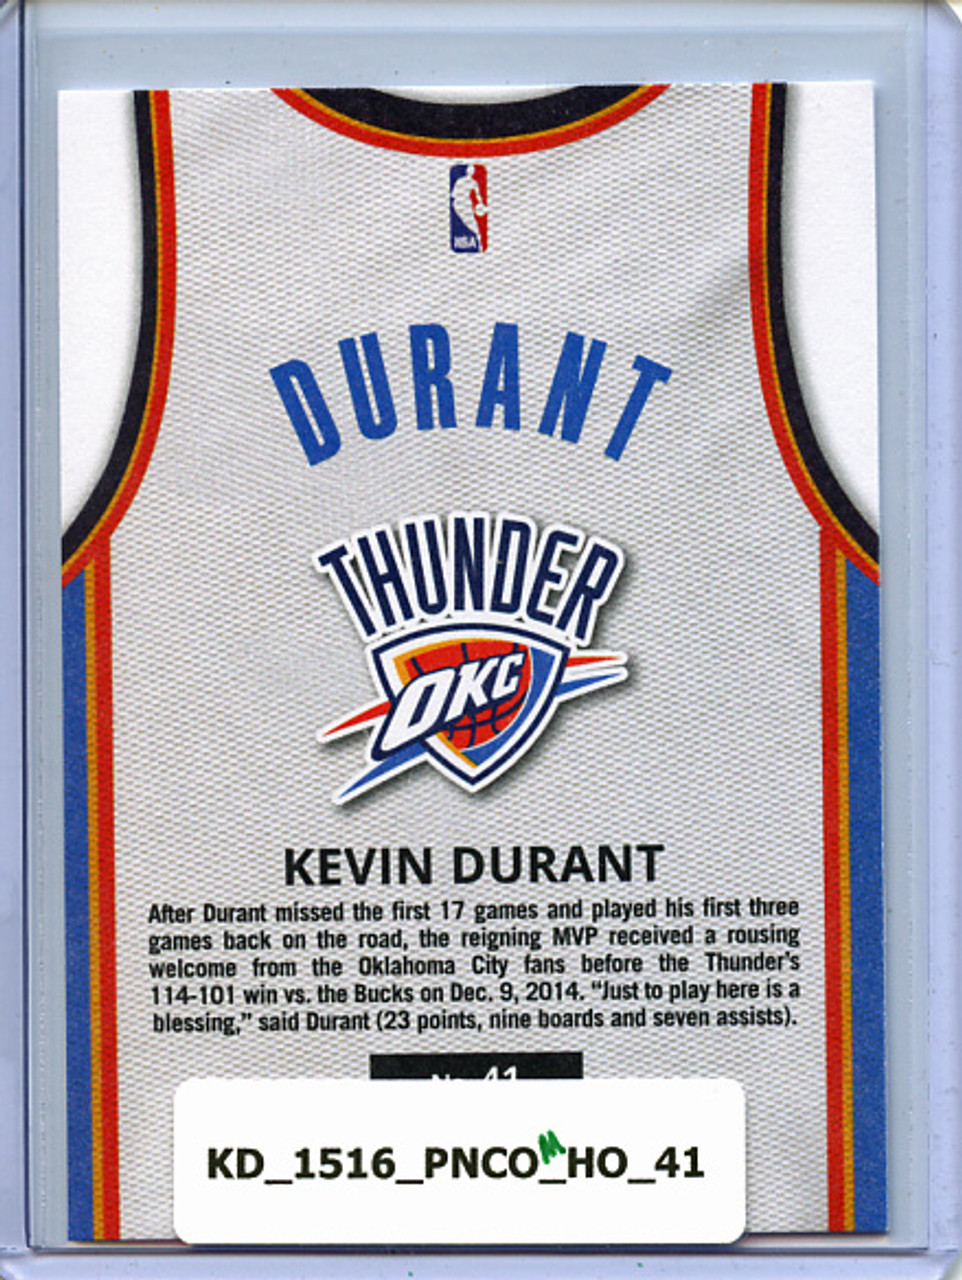 Kevin Durant 2015-16 Complete, Home #41